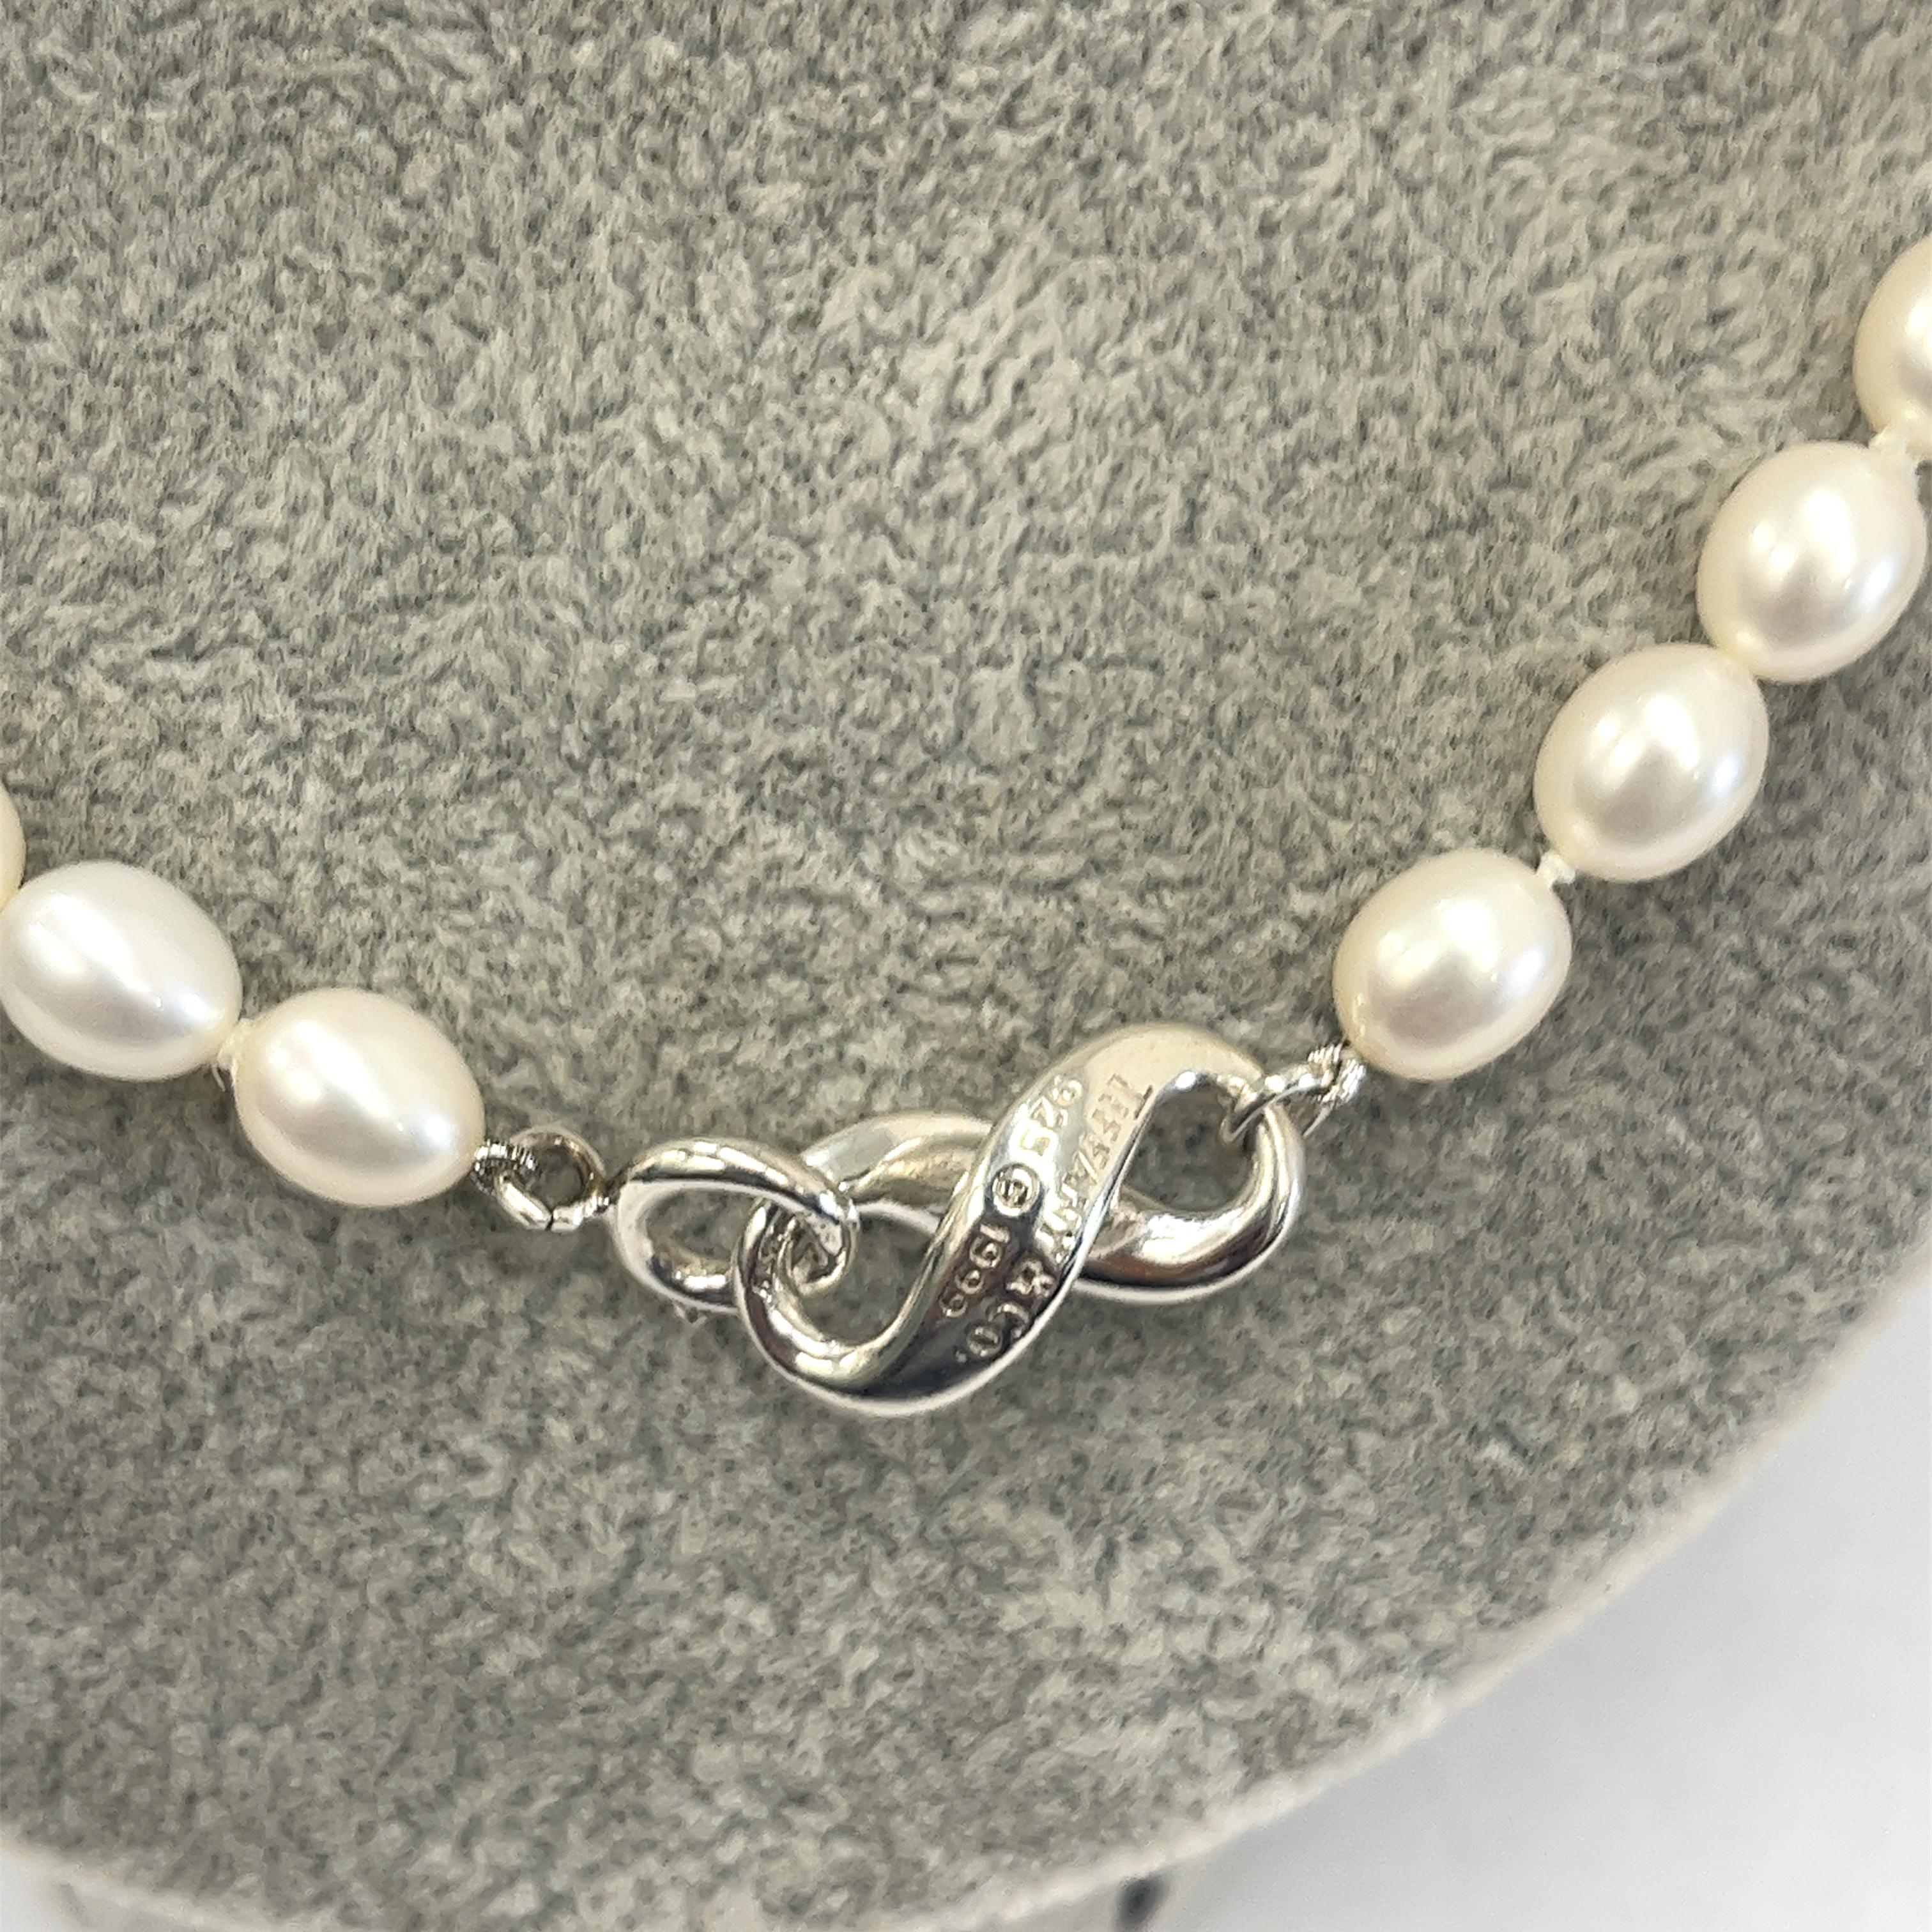  Tiffany & Co. Collier Infinity Figure 8 perles blanches 34.1 g Pour femmes 